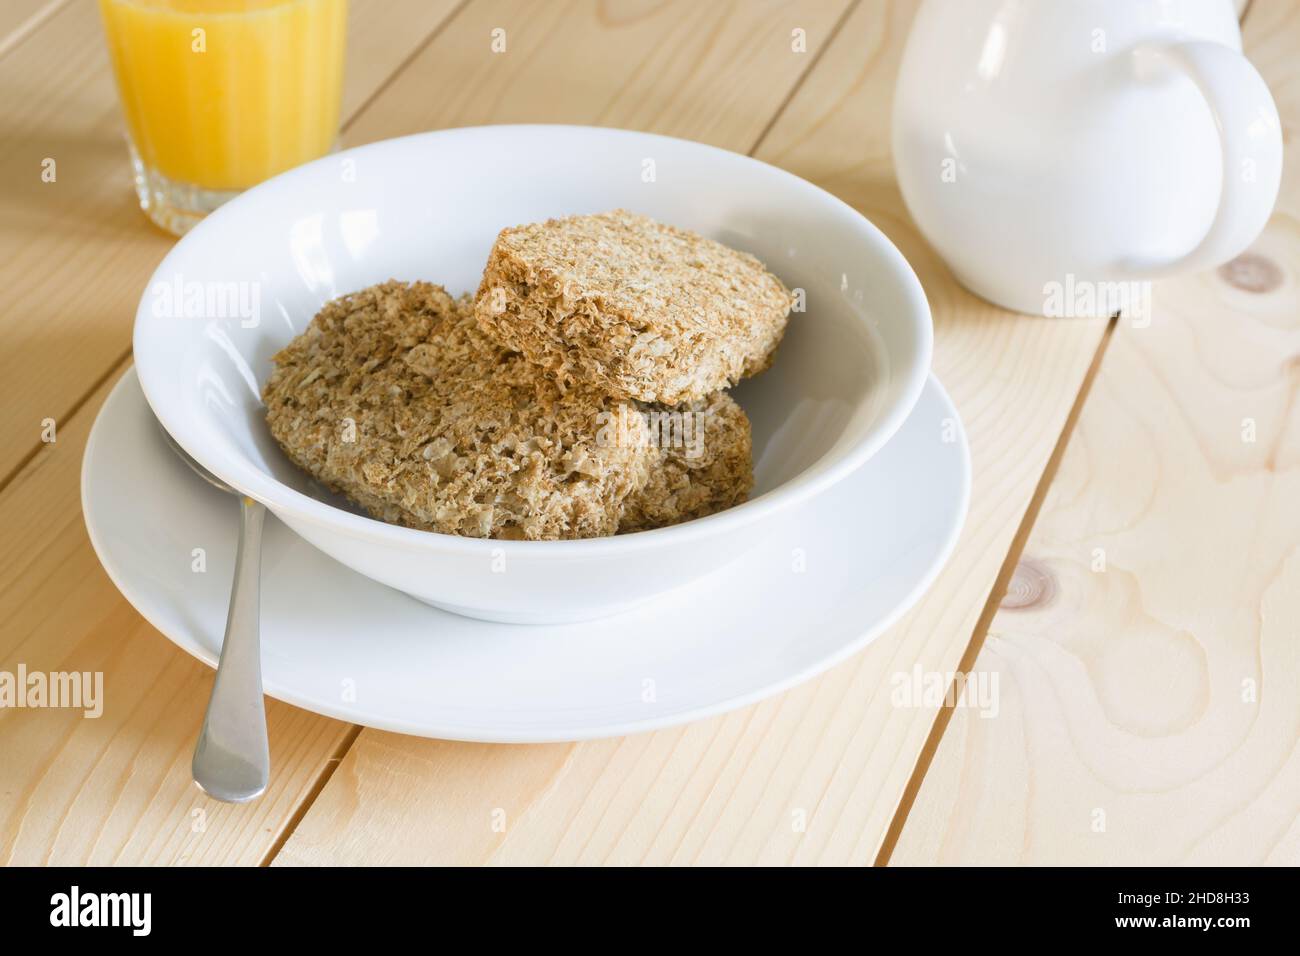 Healthy whole wheat breakfast cereal biscuits with orange juice Stock Photo